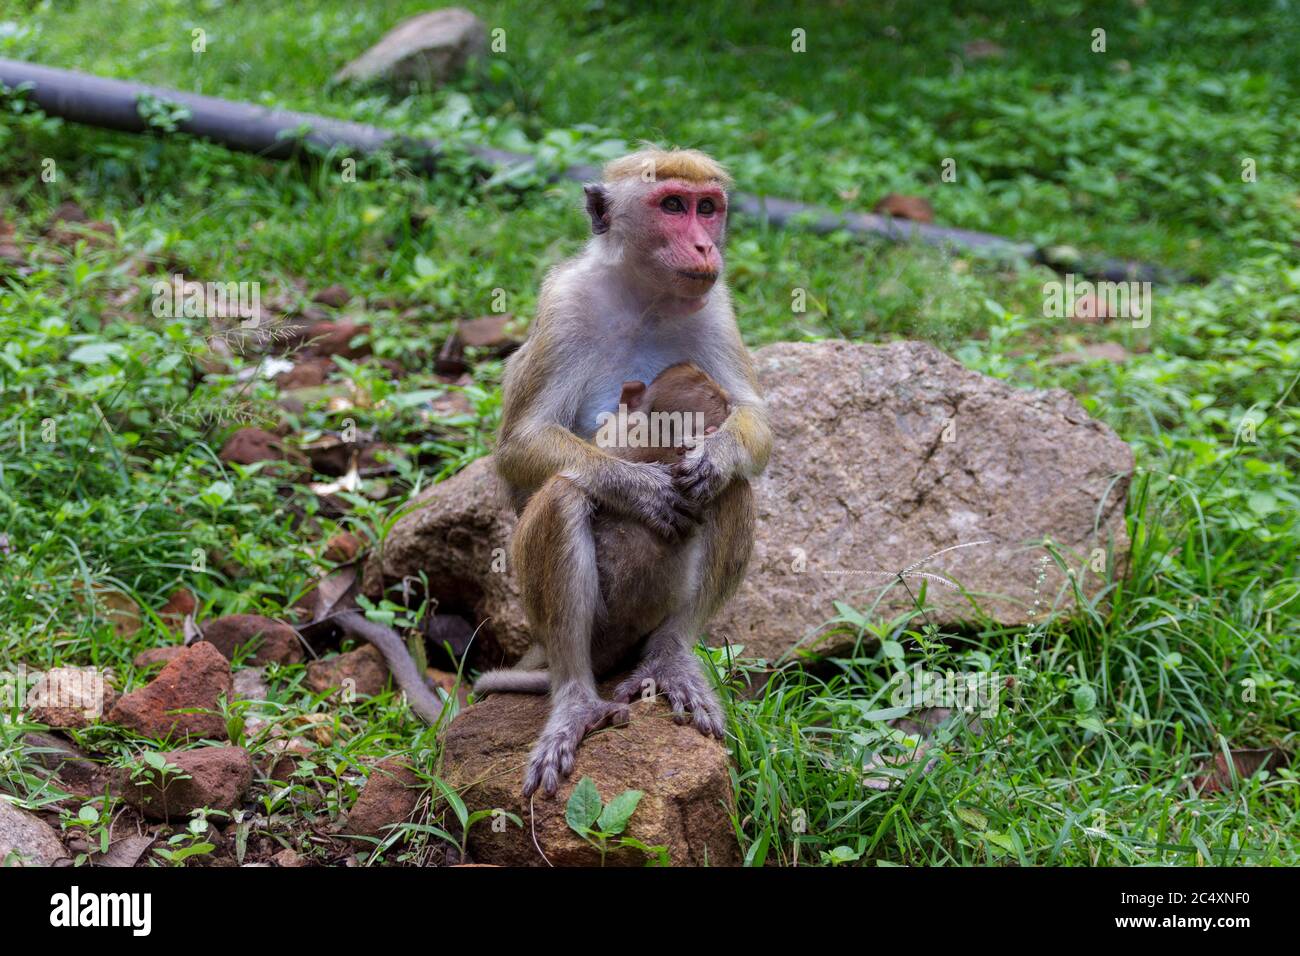 Urban monkey sits on a rock and relax in the sun. Concept of animal care, travel and wildlife observation.Urban animals concept. Stock Photo